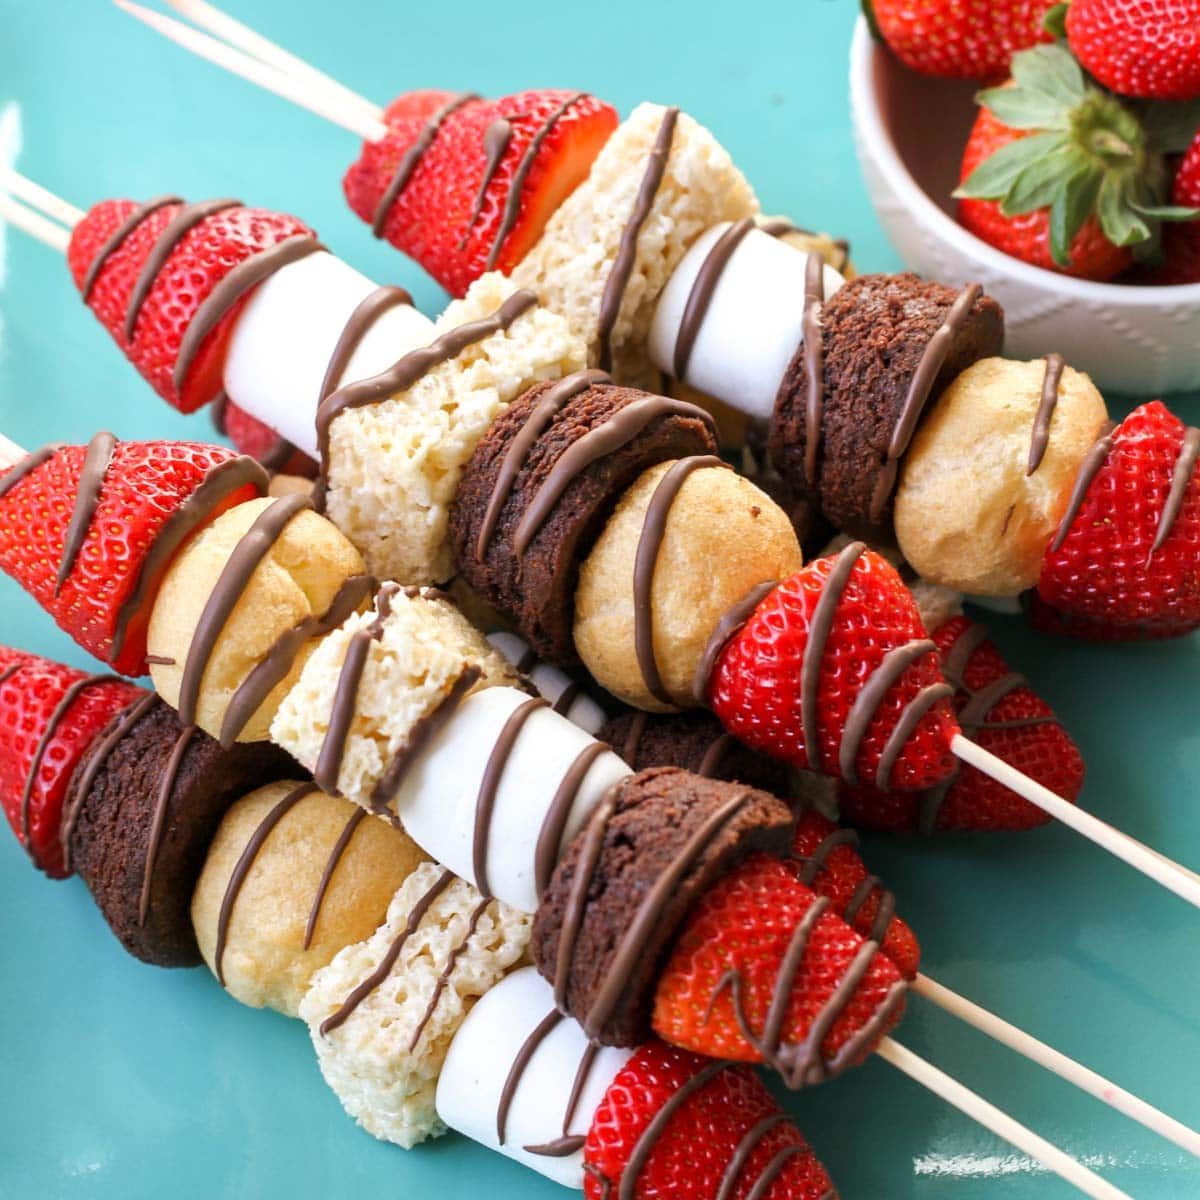 New years eve desserts - several dessert kabobs drizzled in chocoalte.